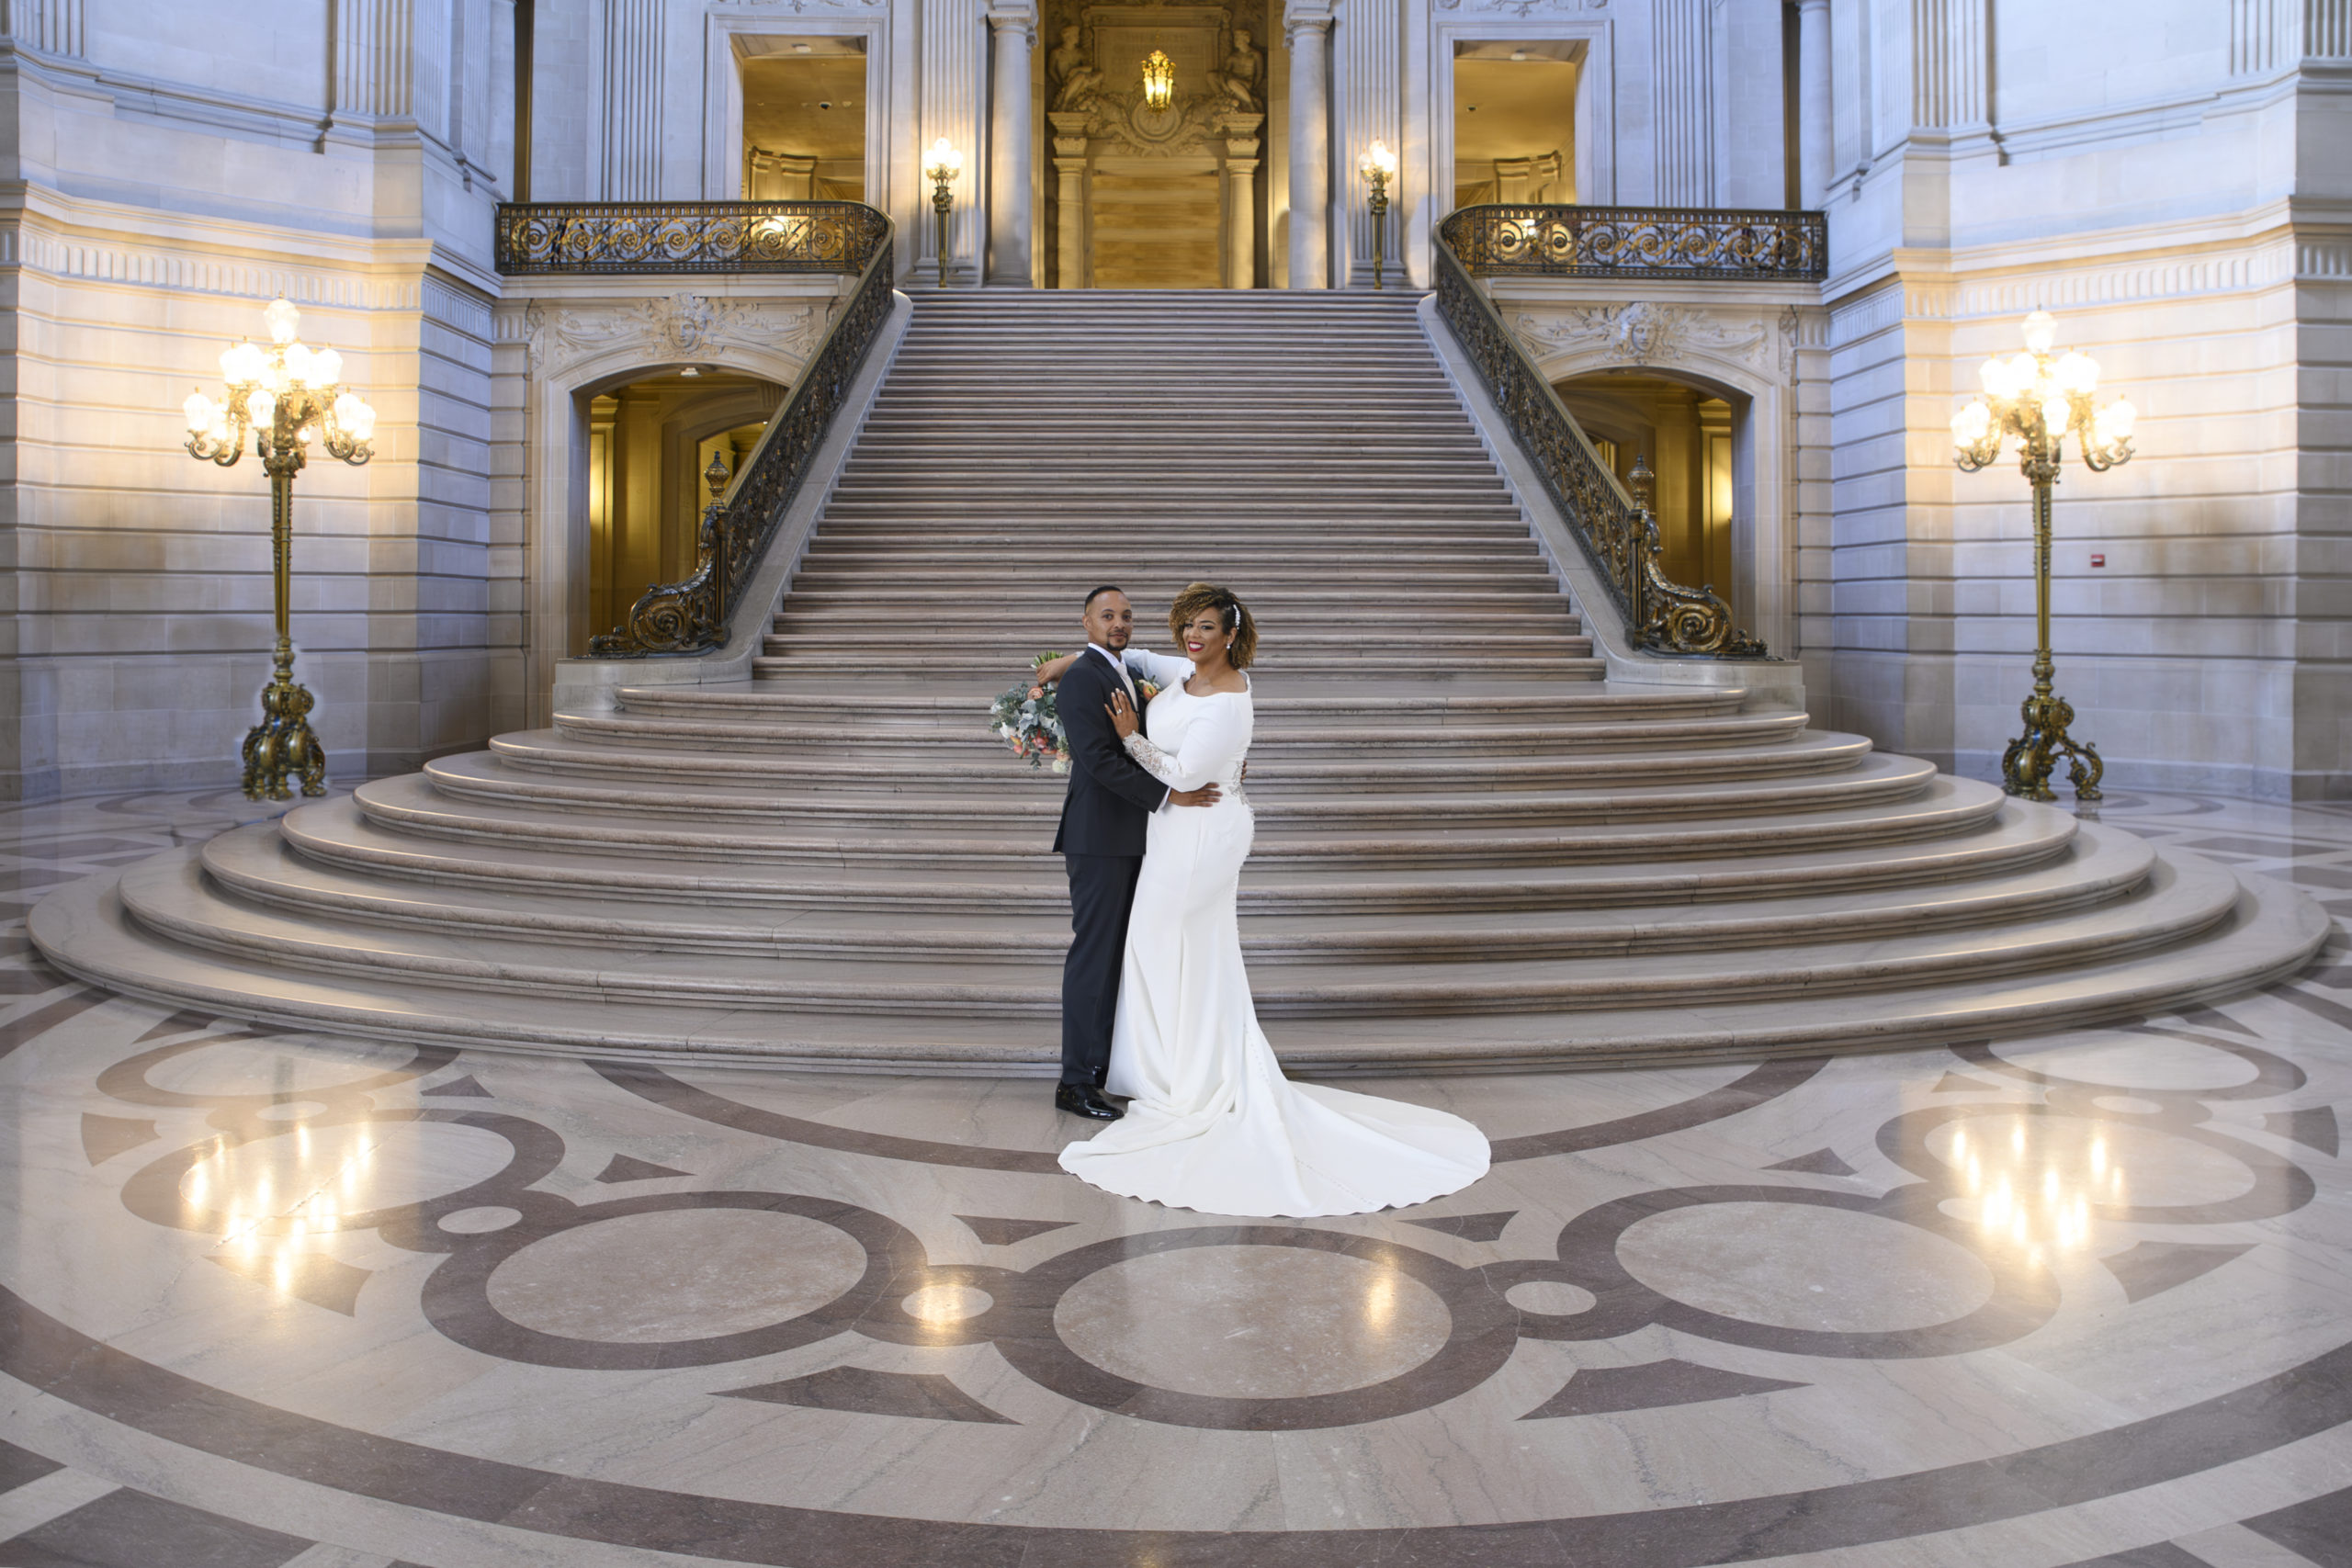 San Francisco city hall bride and groom on the Grand Staircase